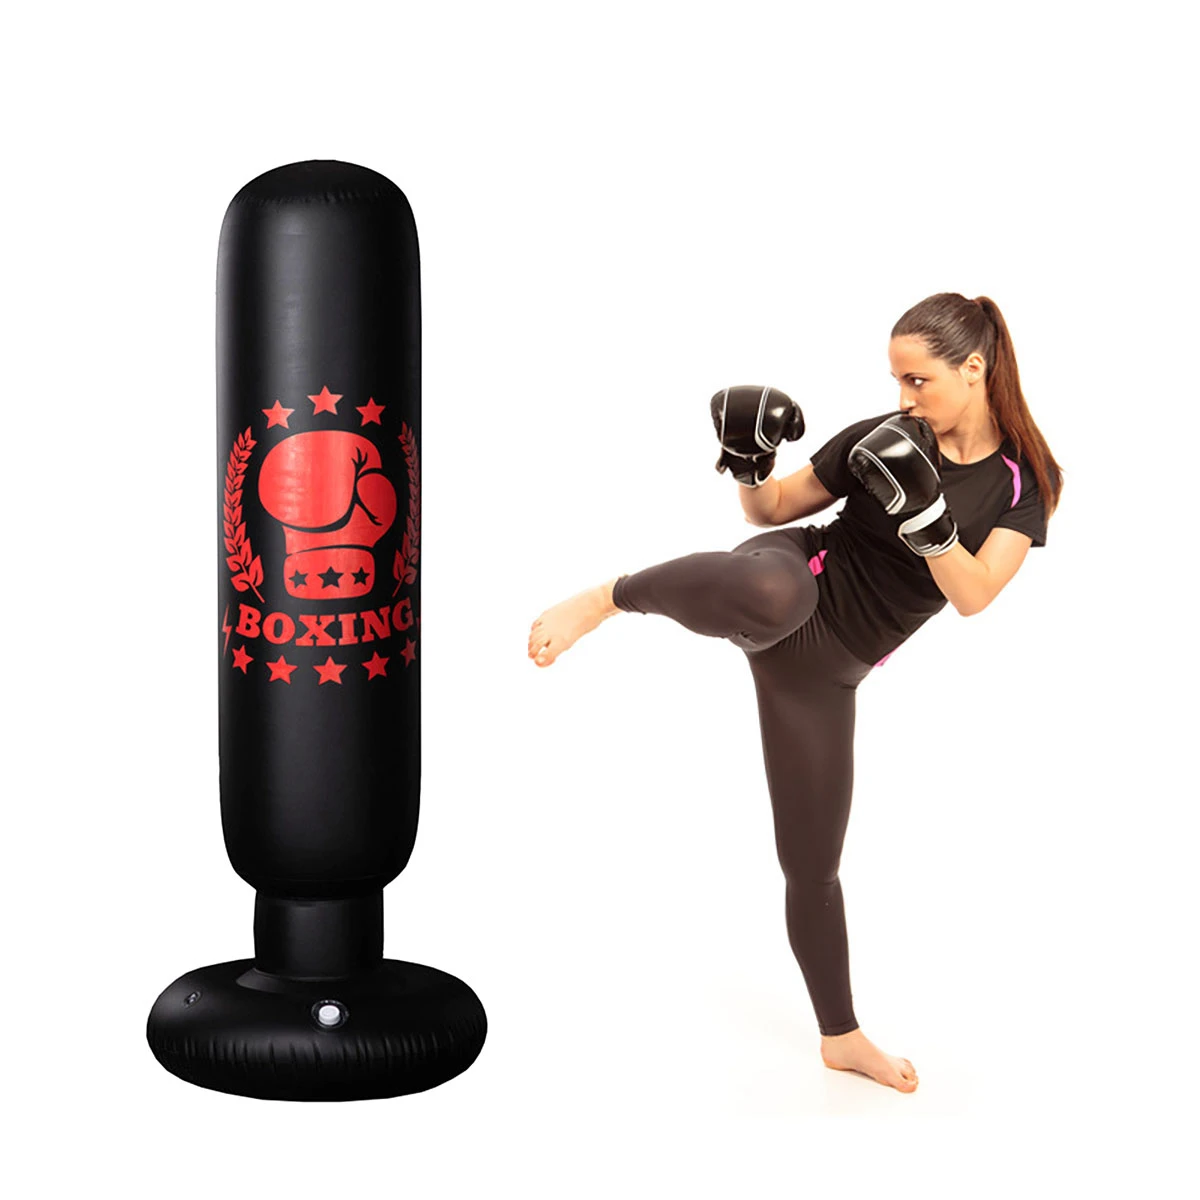 1.6M Free Standing Inflatable Boxing Punch Bag Kick MMA Training Kid Adults UK